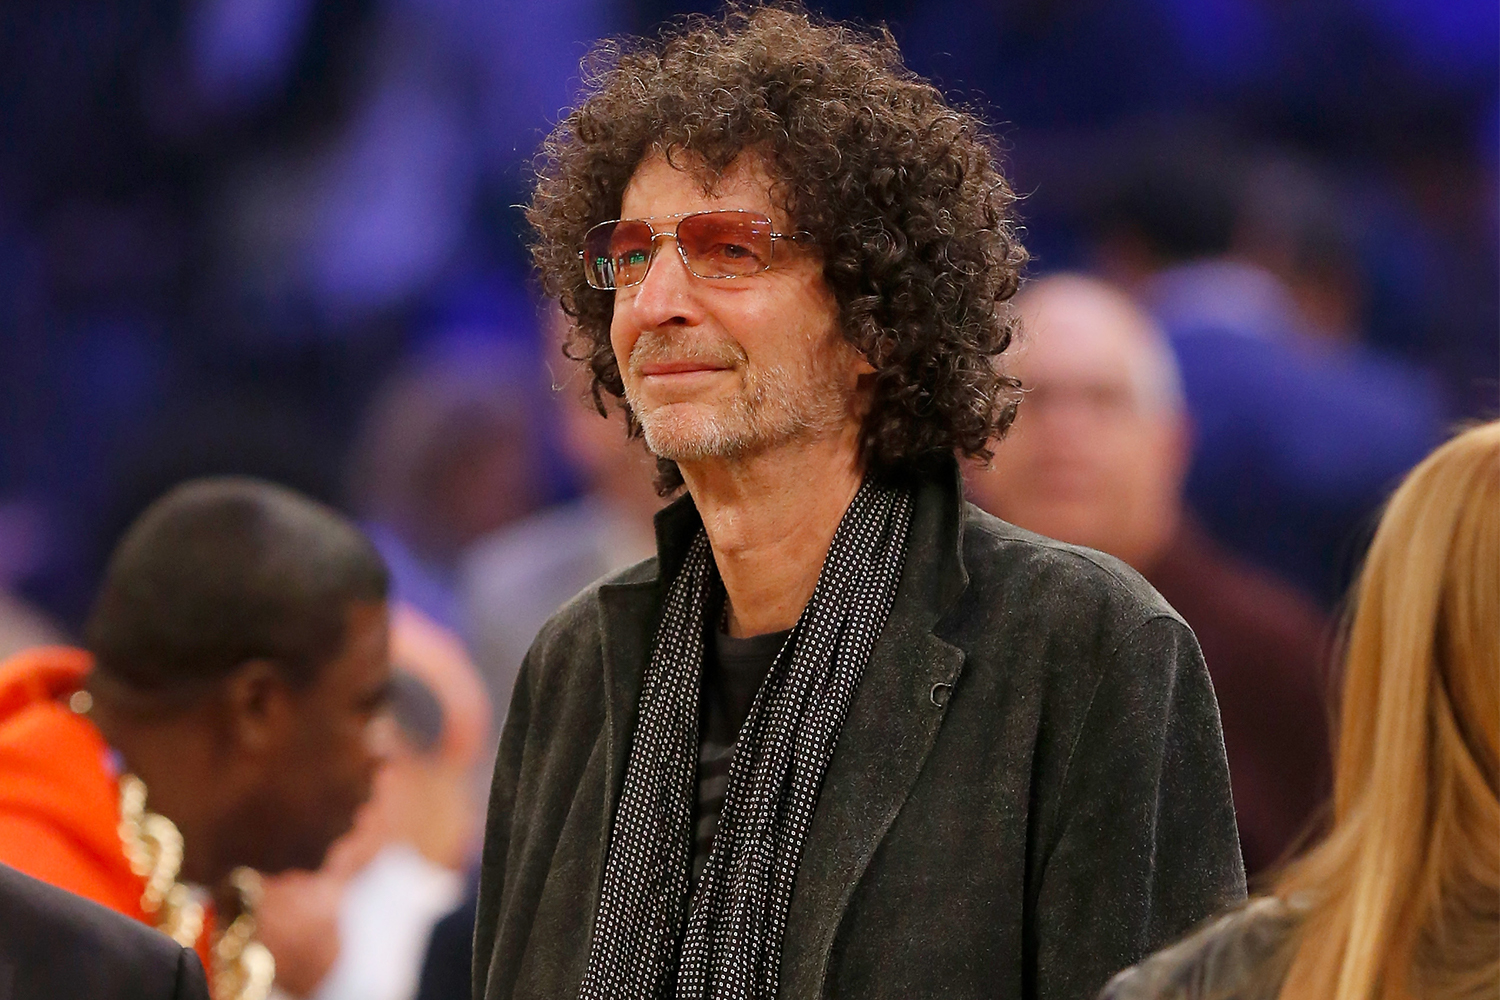 Radio host Howard Stern courtside at a New York Knicks game at Madison Square Garden in 2018